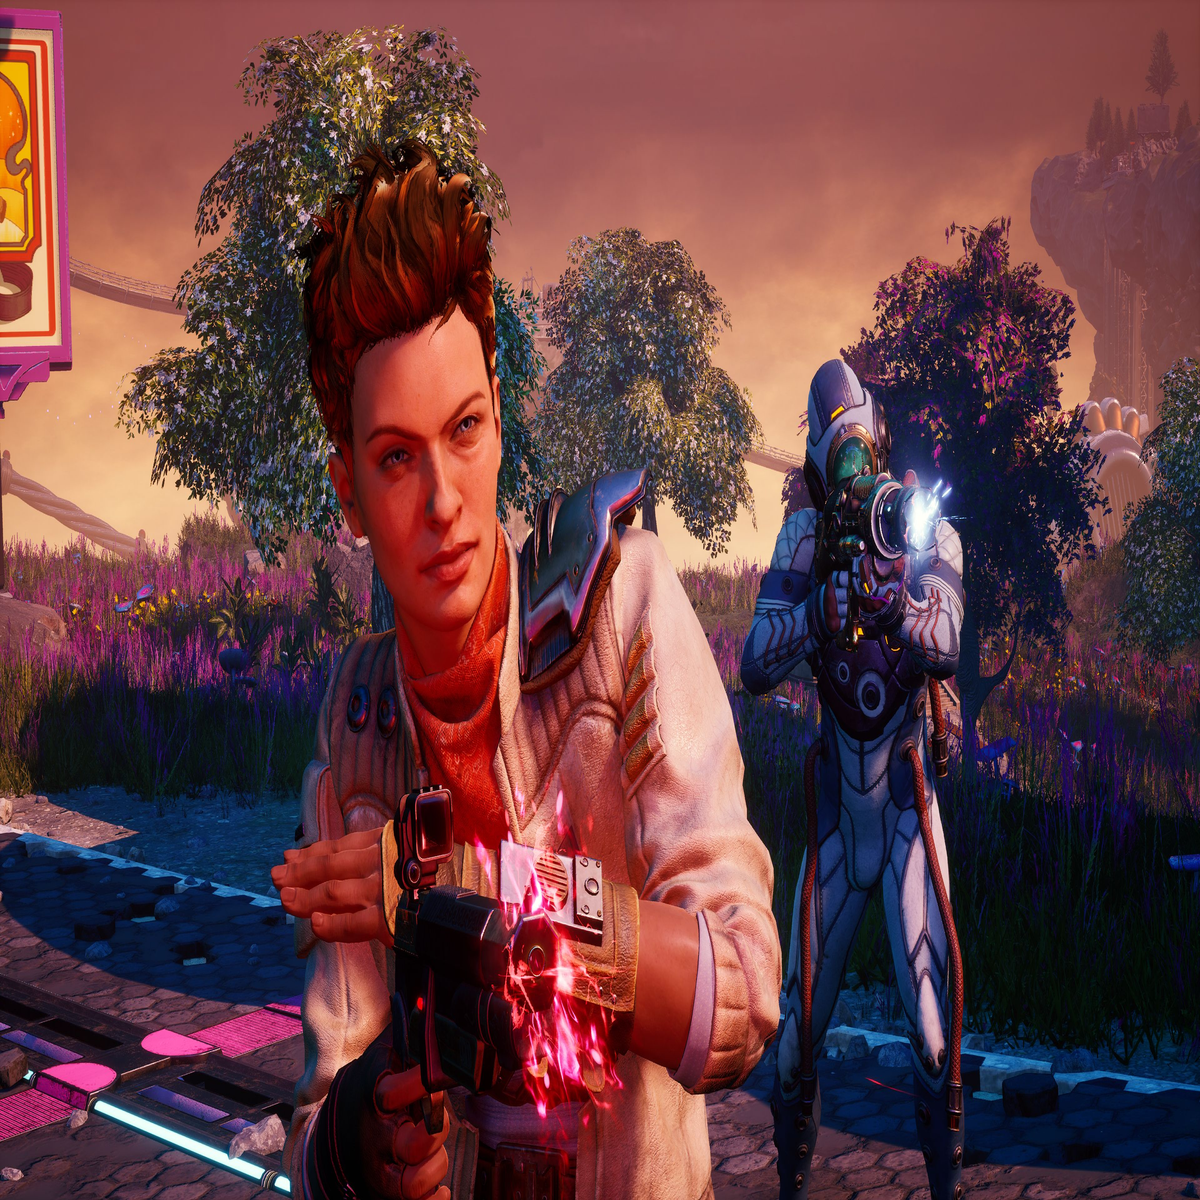 The Outer Worlds: Spacer's Choice Edition Upgrade on Steam